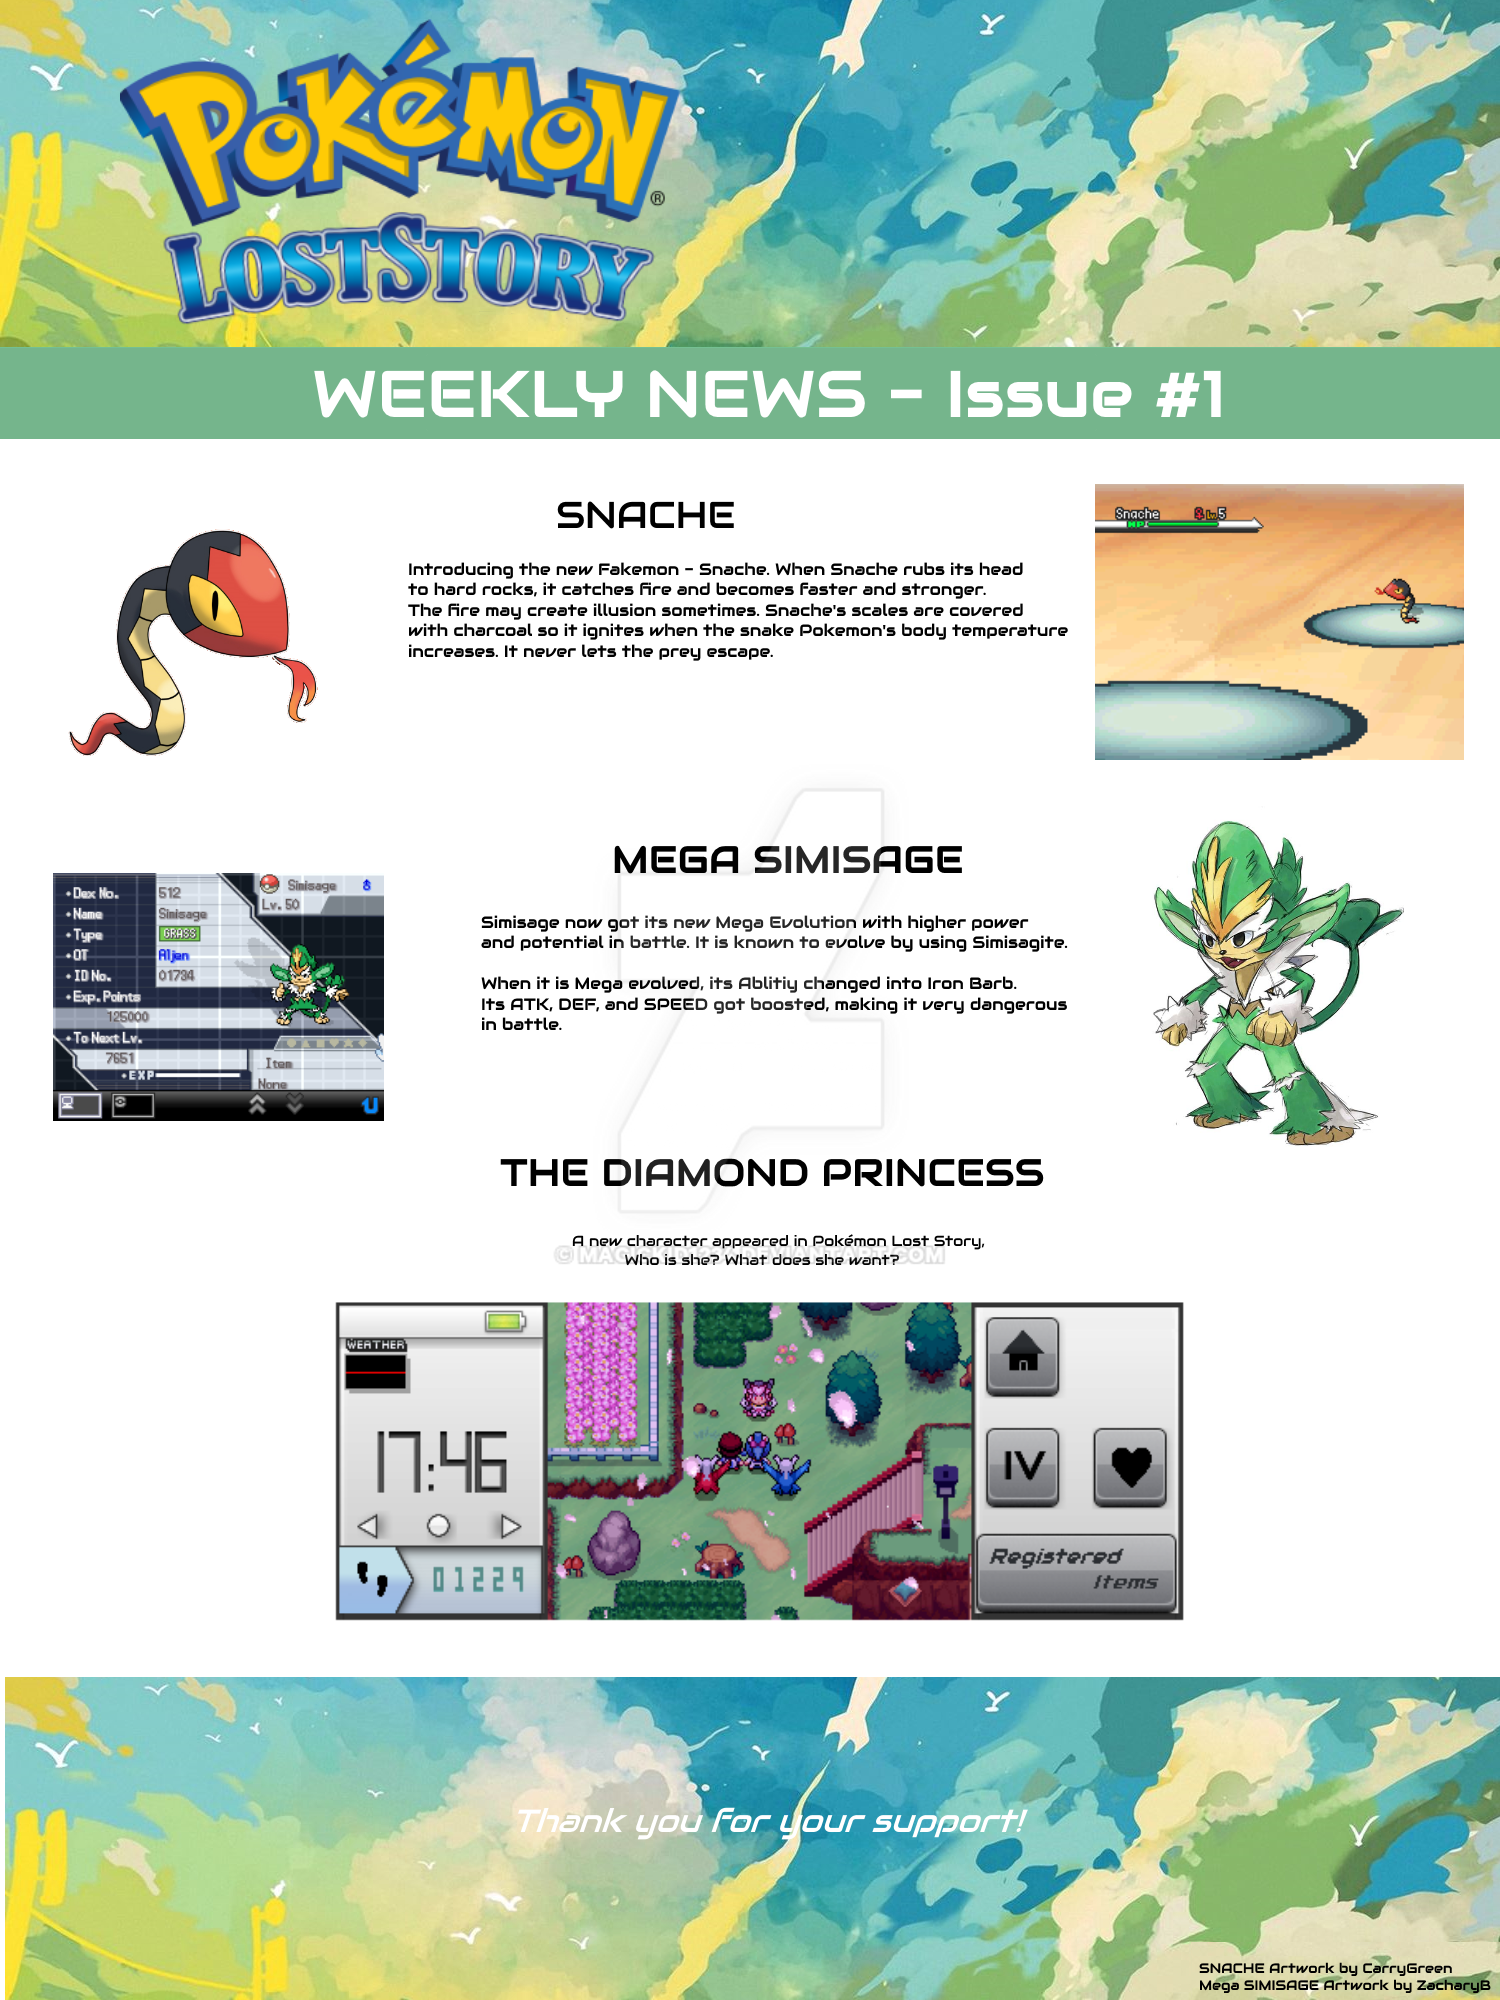 pokemon_lost_story___weekly_news___issue__1_by_magickid1234-d9fh5n3.png